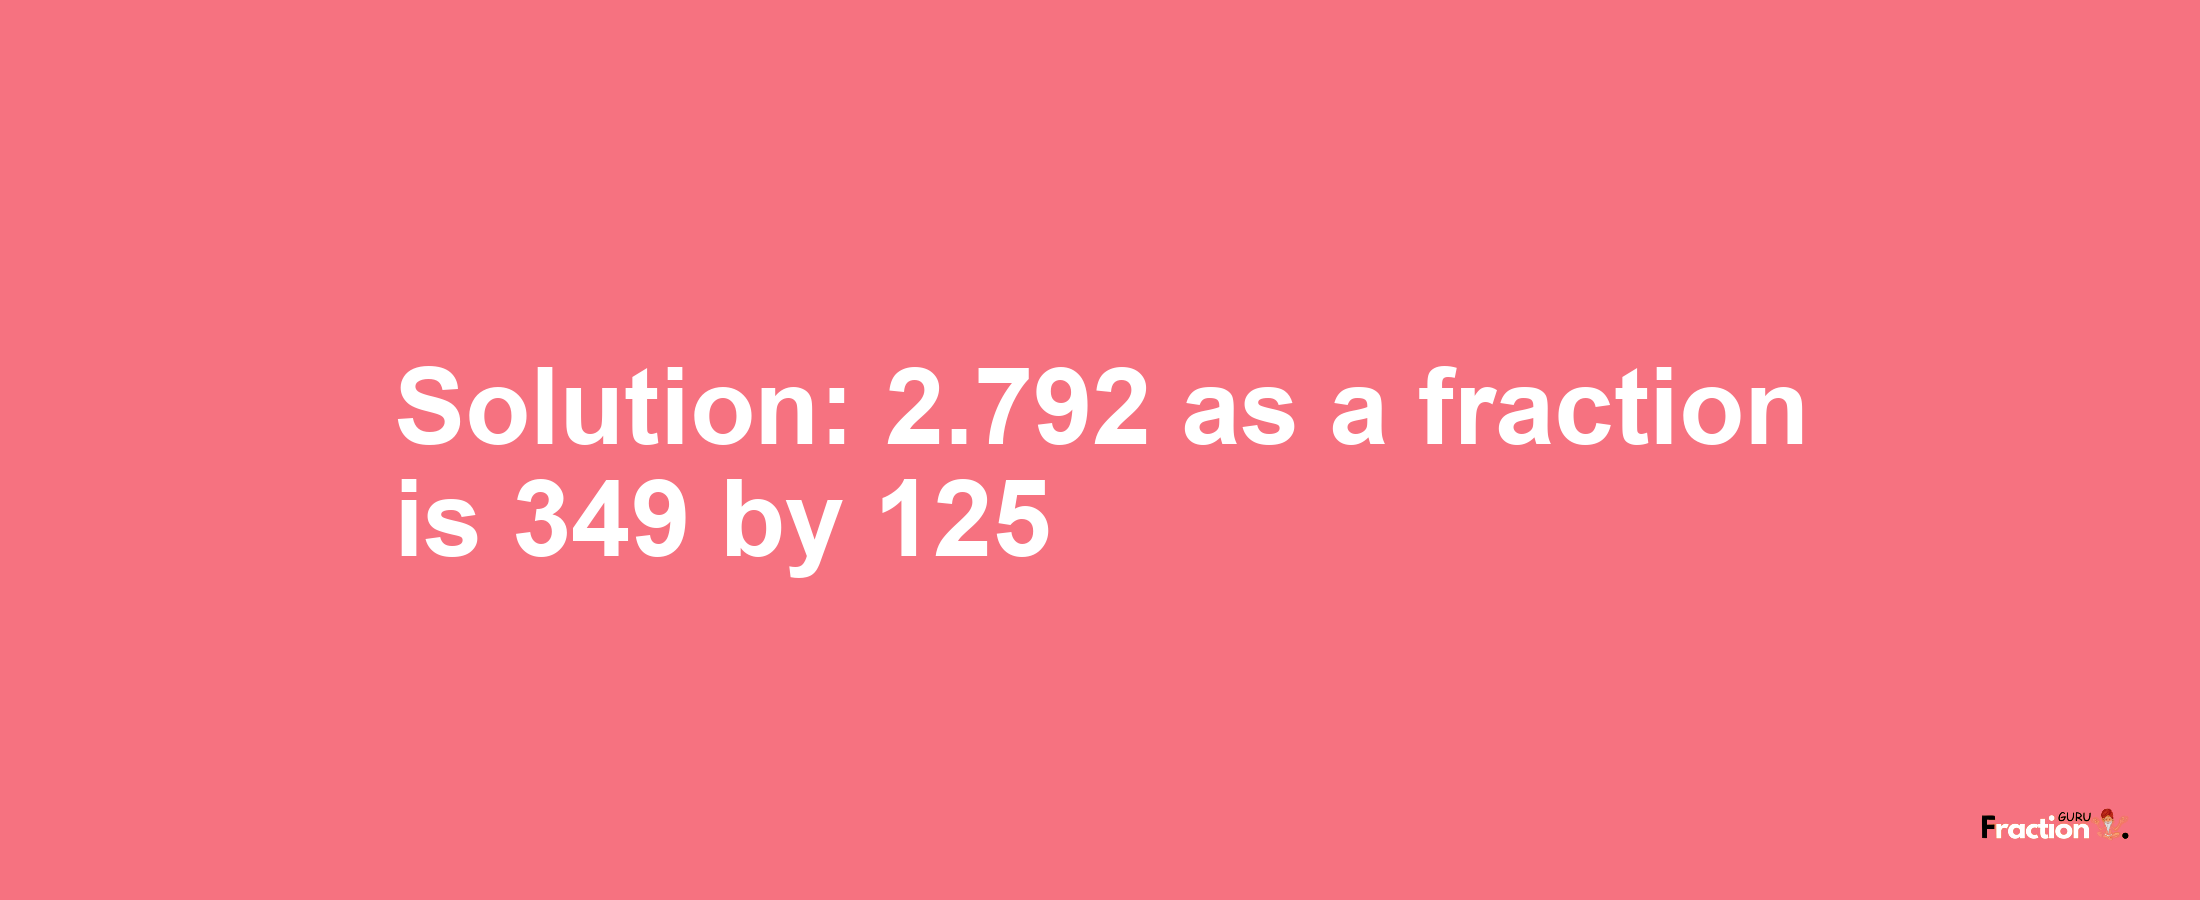 Solution:2.792 as a fraction is 349/125